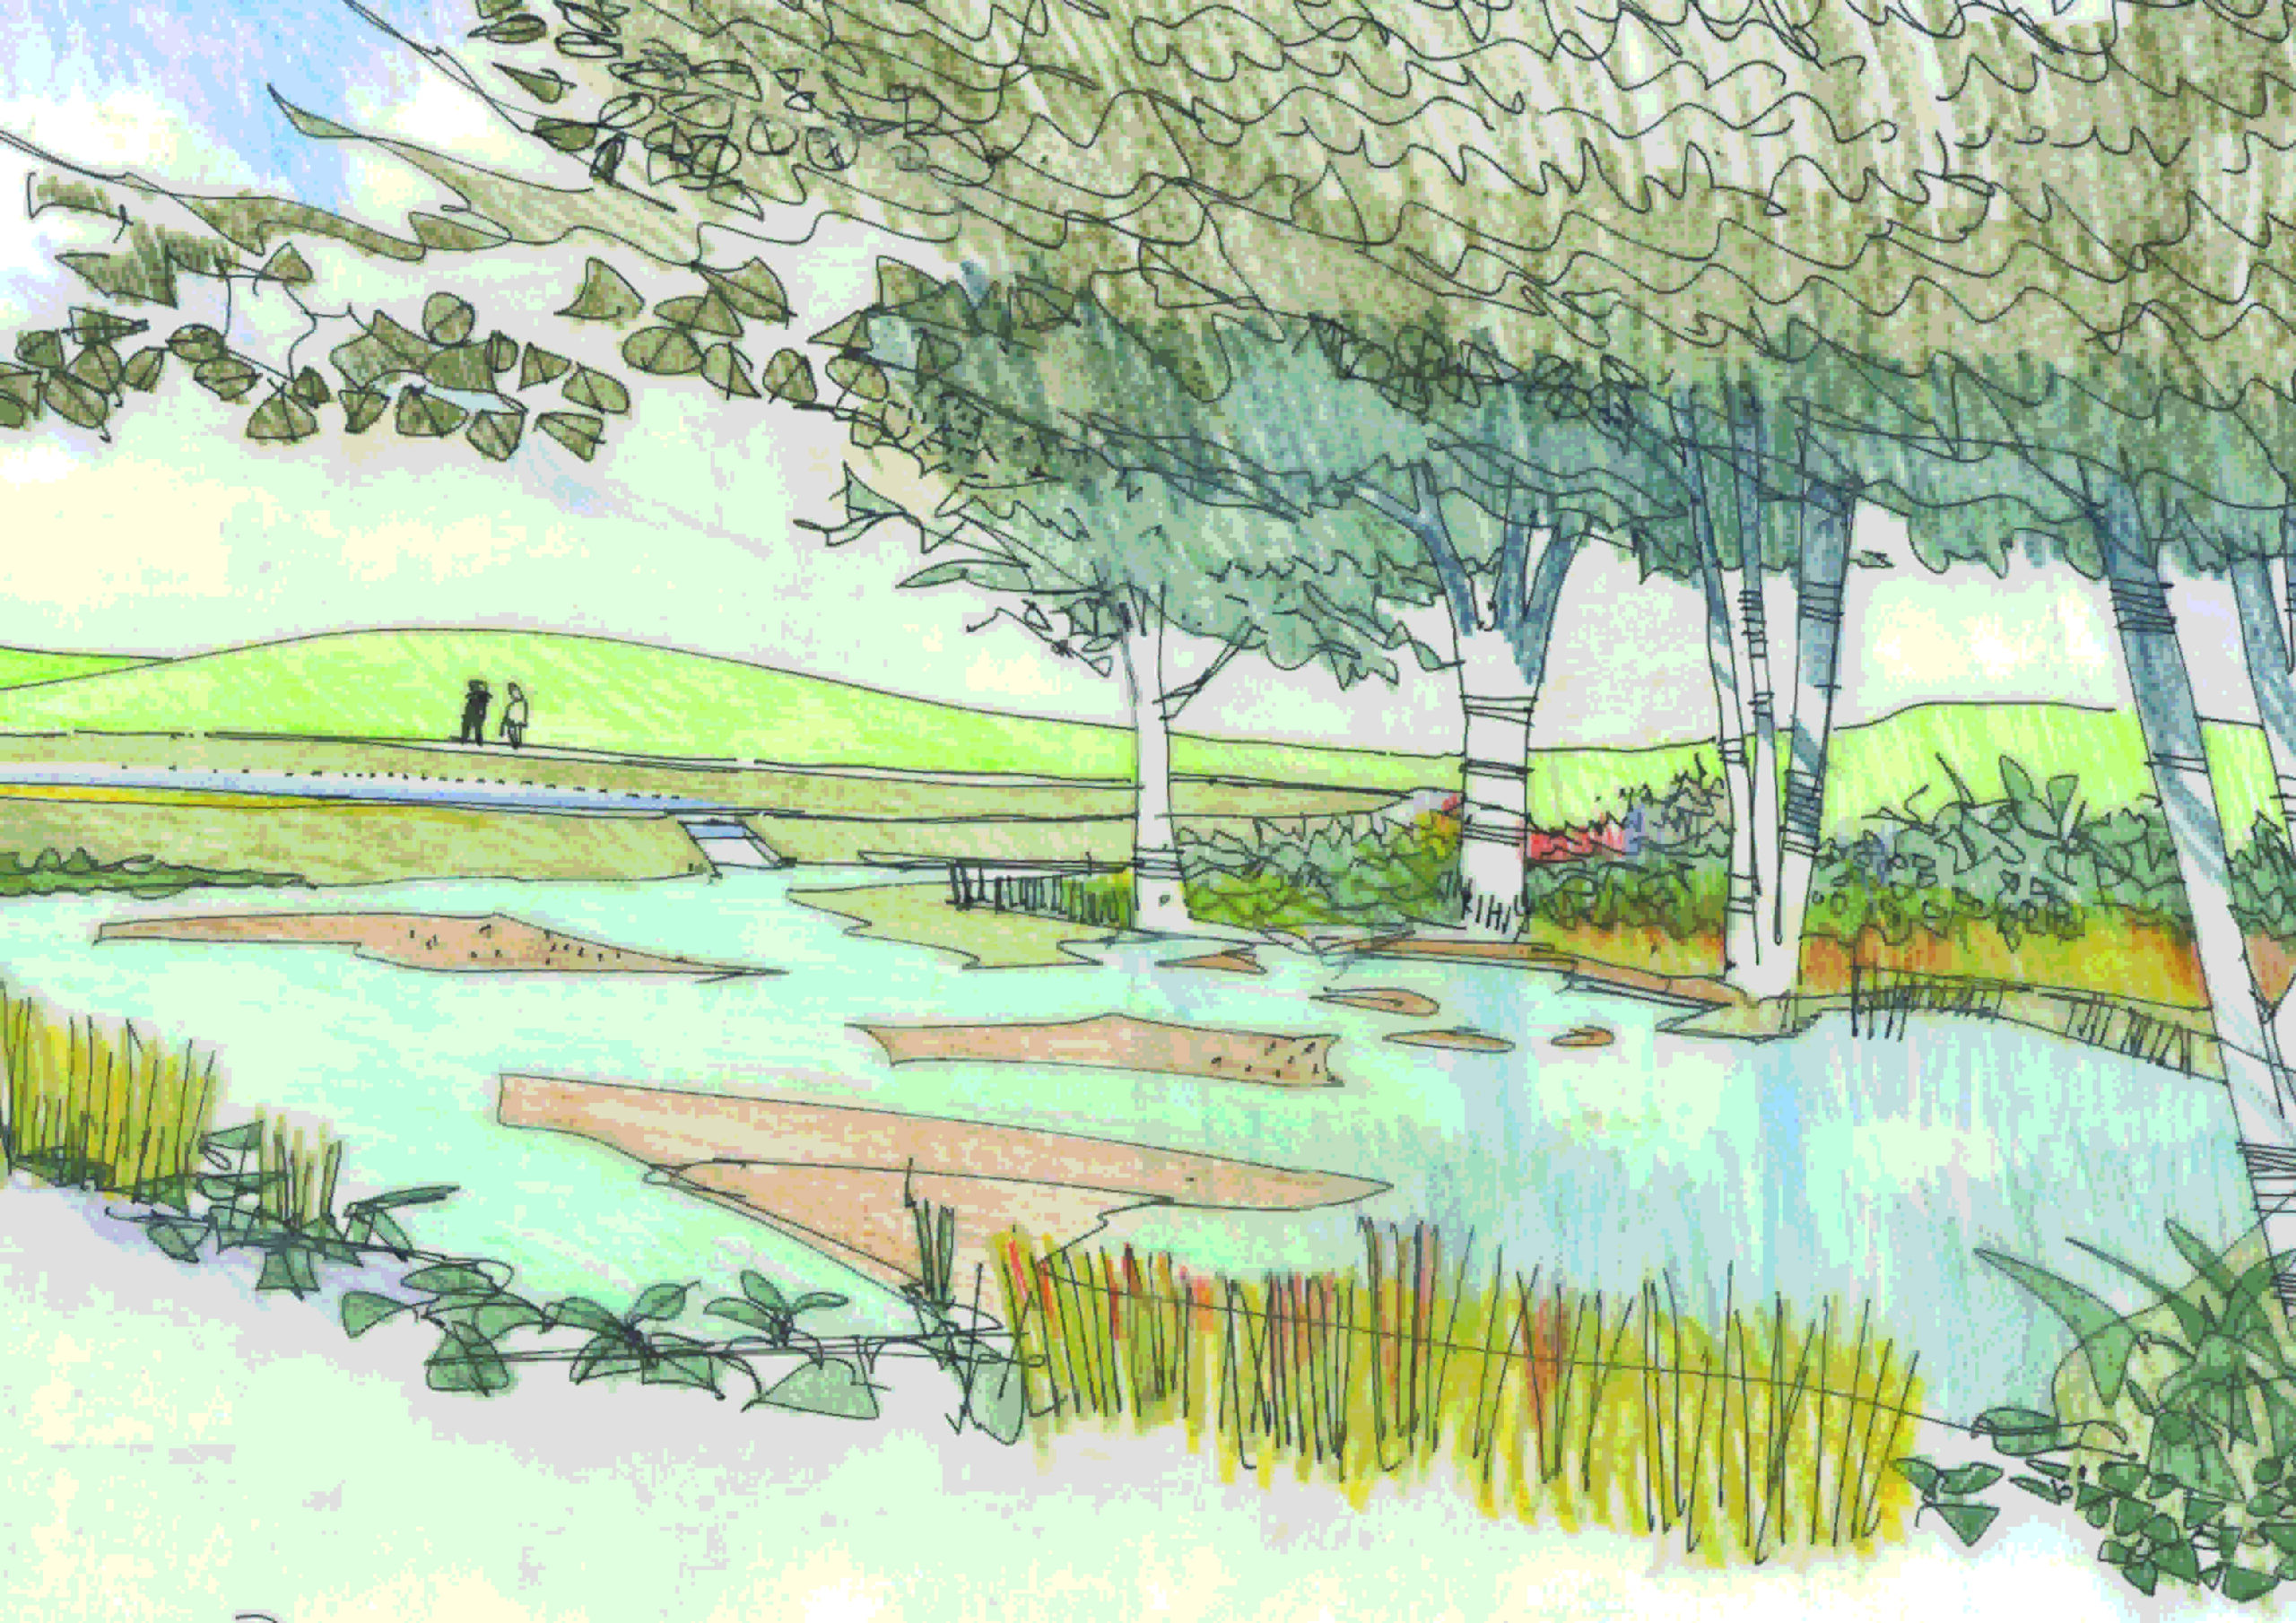 An illustration of detention and retention ponds by Richard Carman